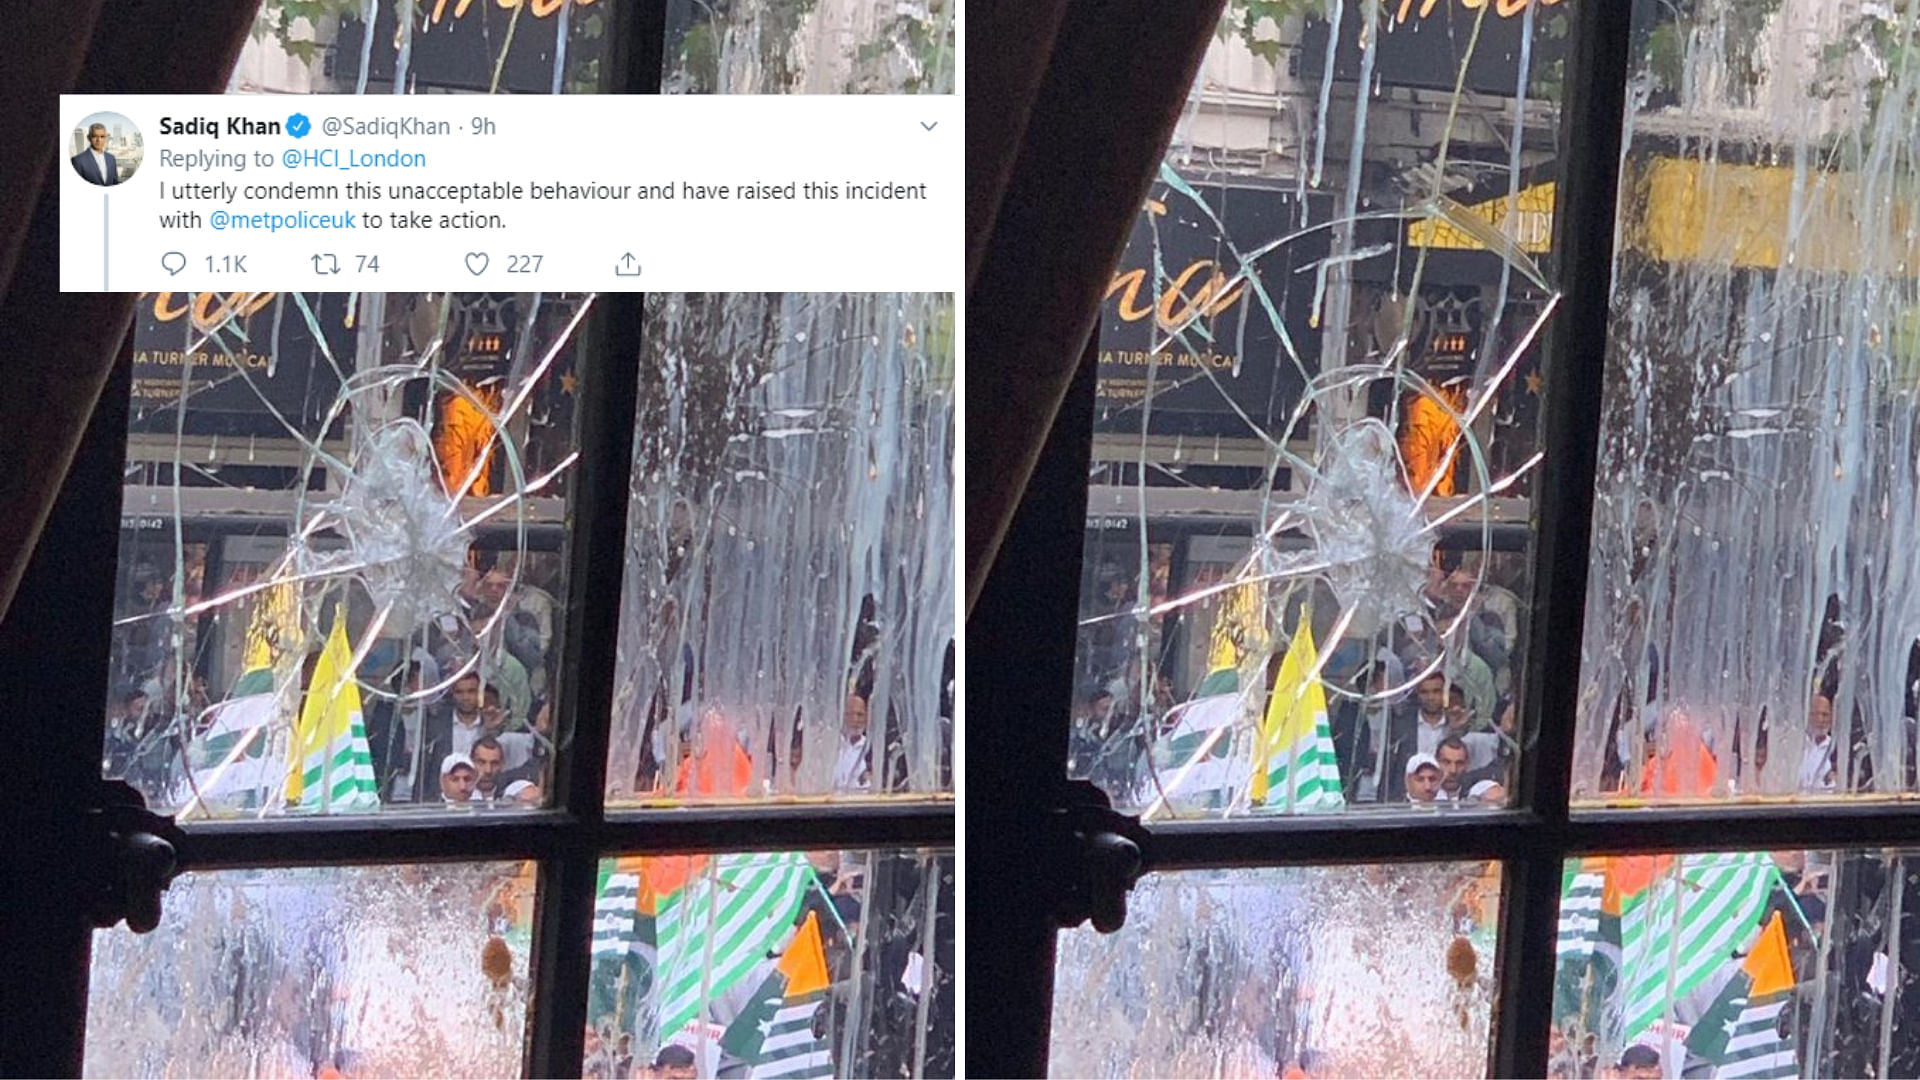 The image tweeted out by India in London shows a smashed window. “Damage caused to the premises,” the Indian high commission said.